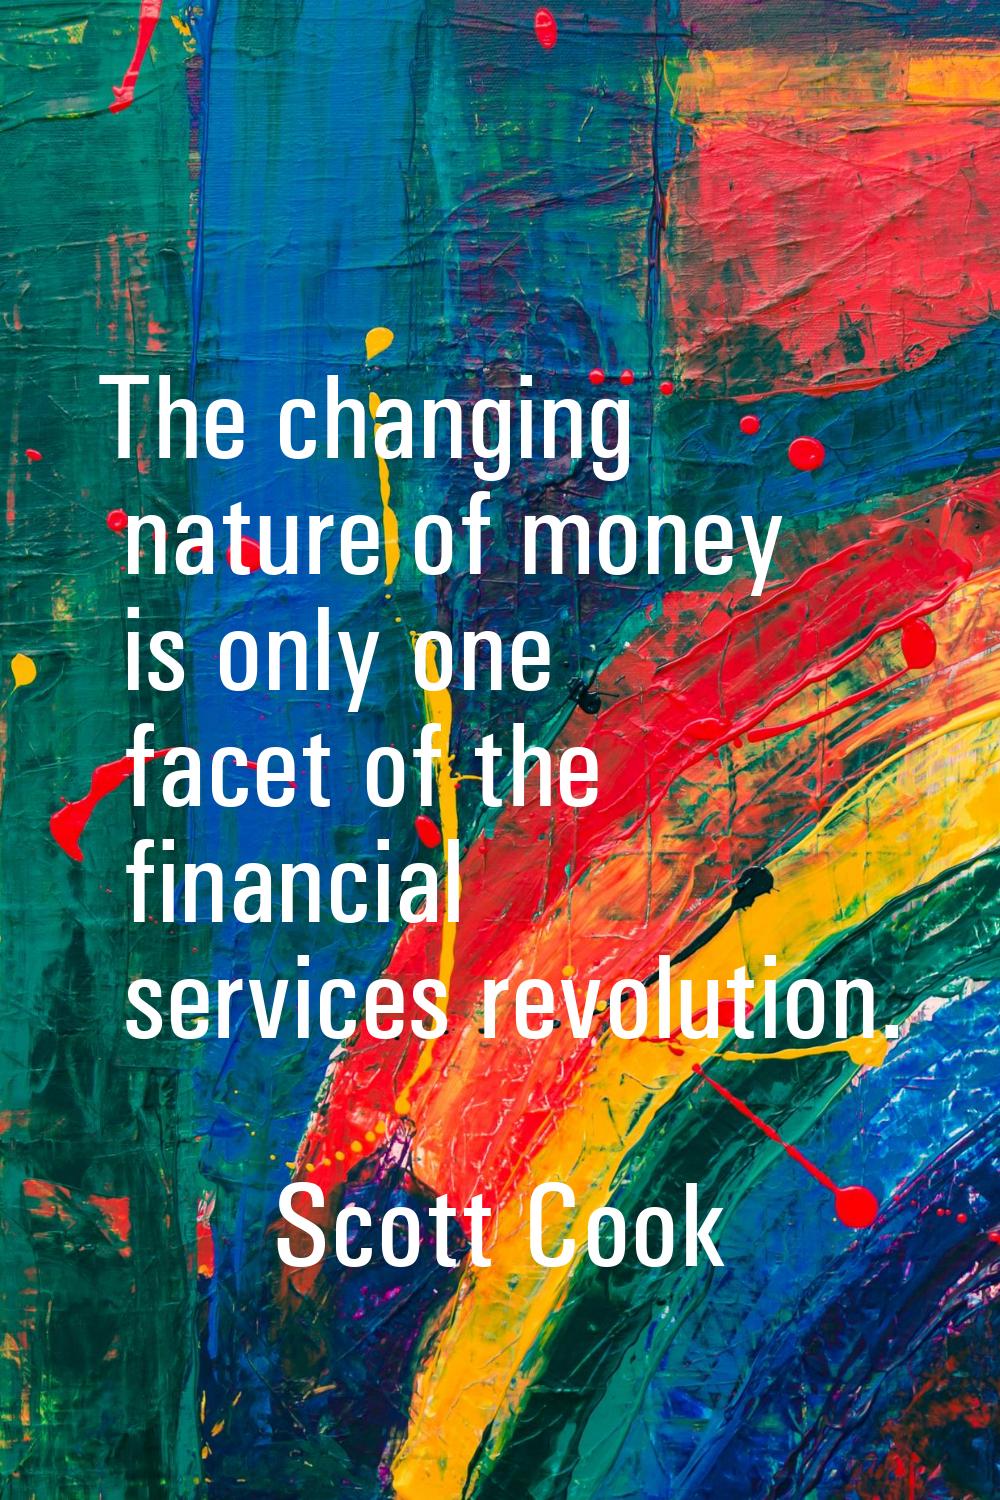 The changing nature of money is only one facet of the financial services revolution.